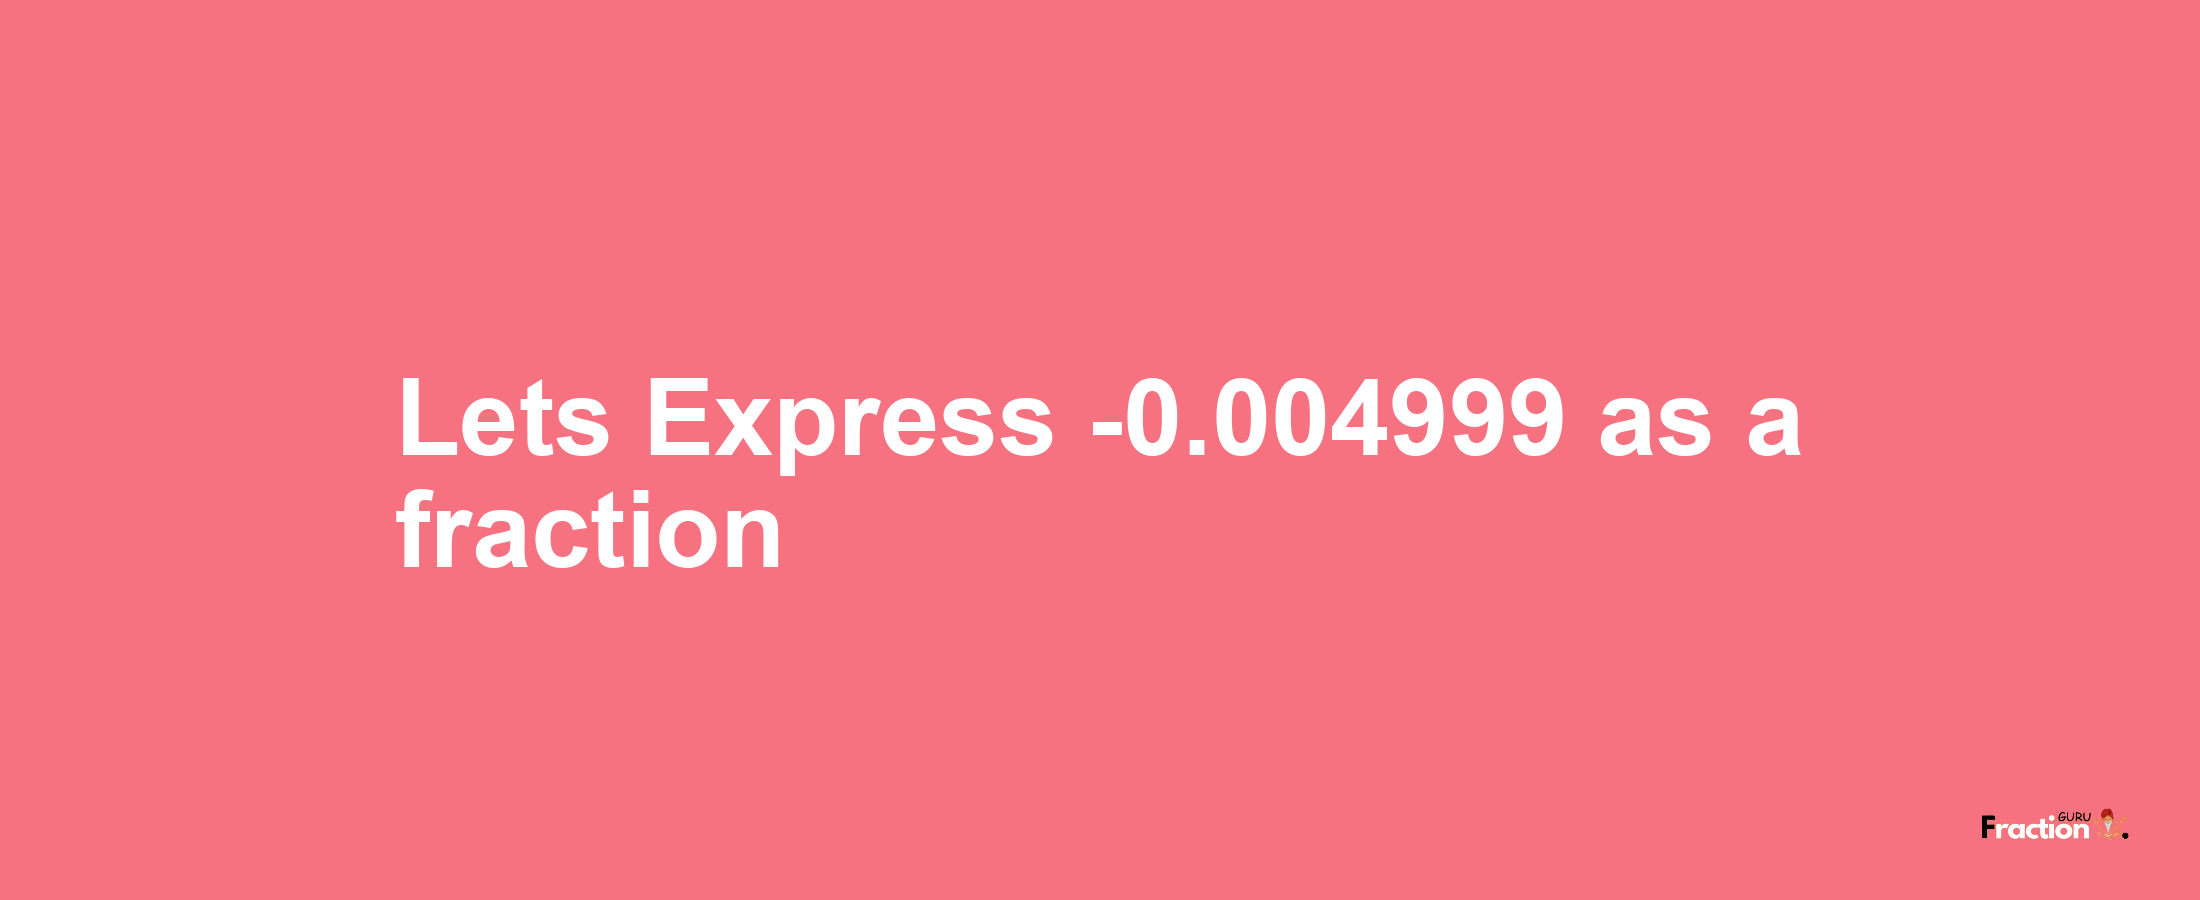 Lets Express -0.004999 as afraction